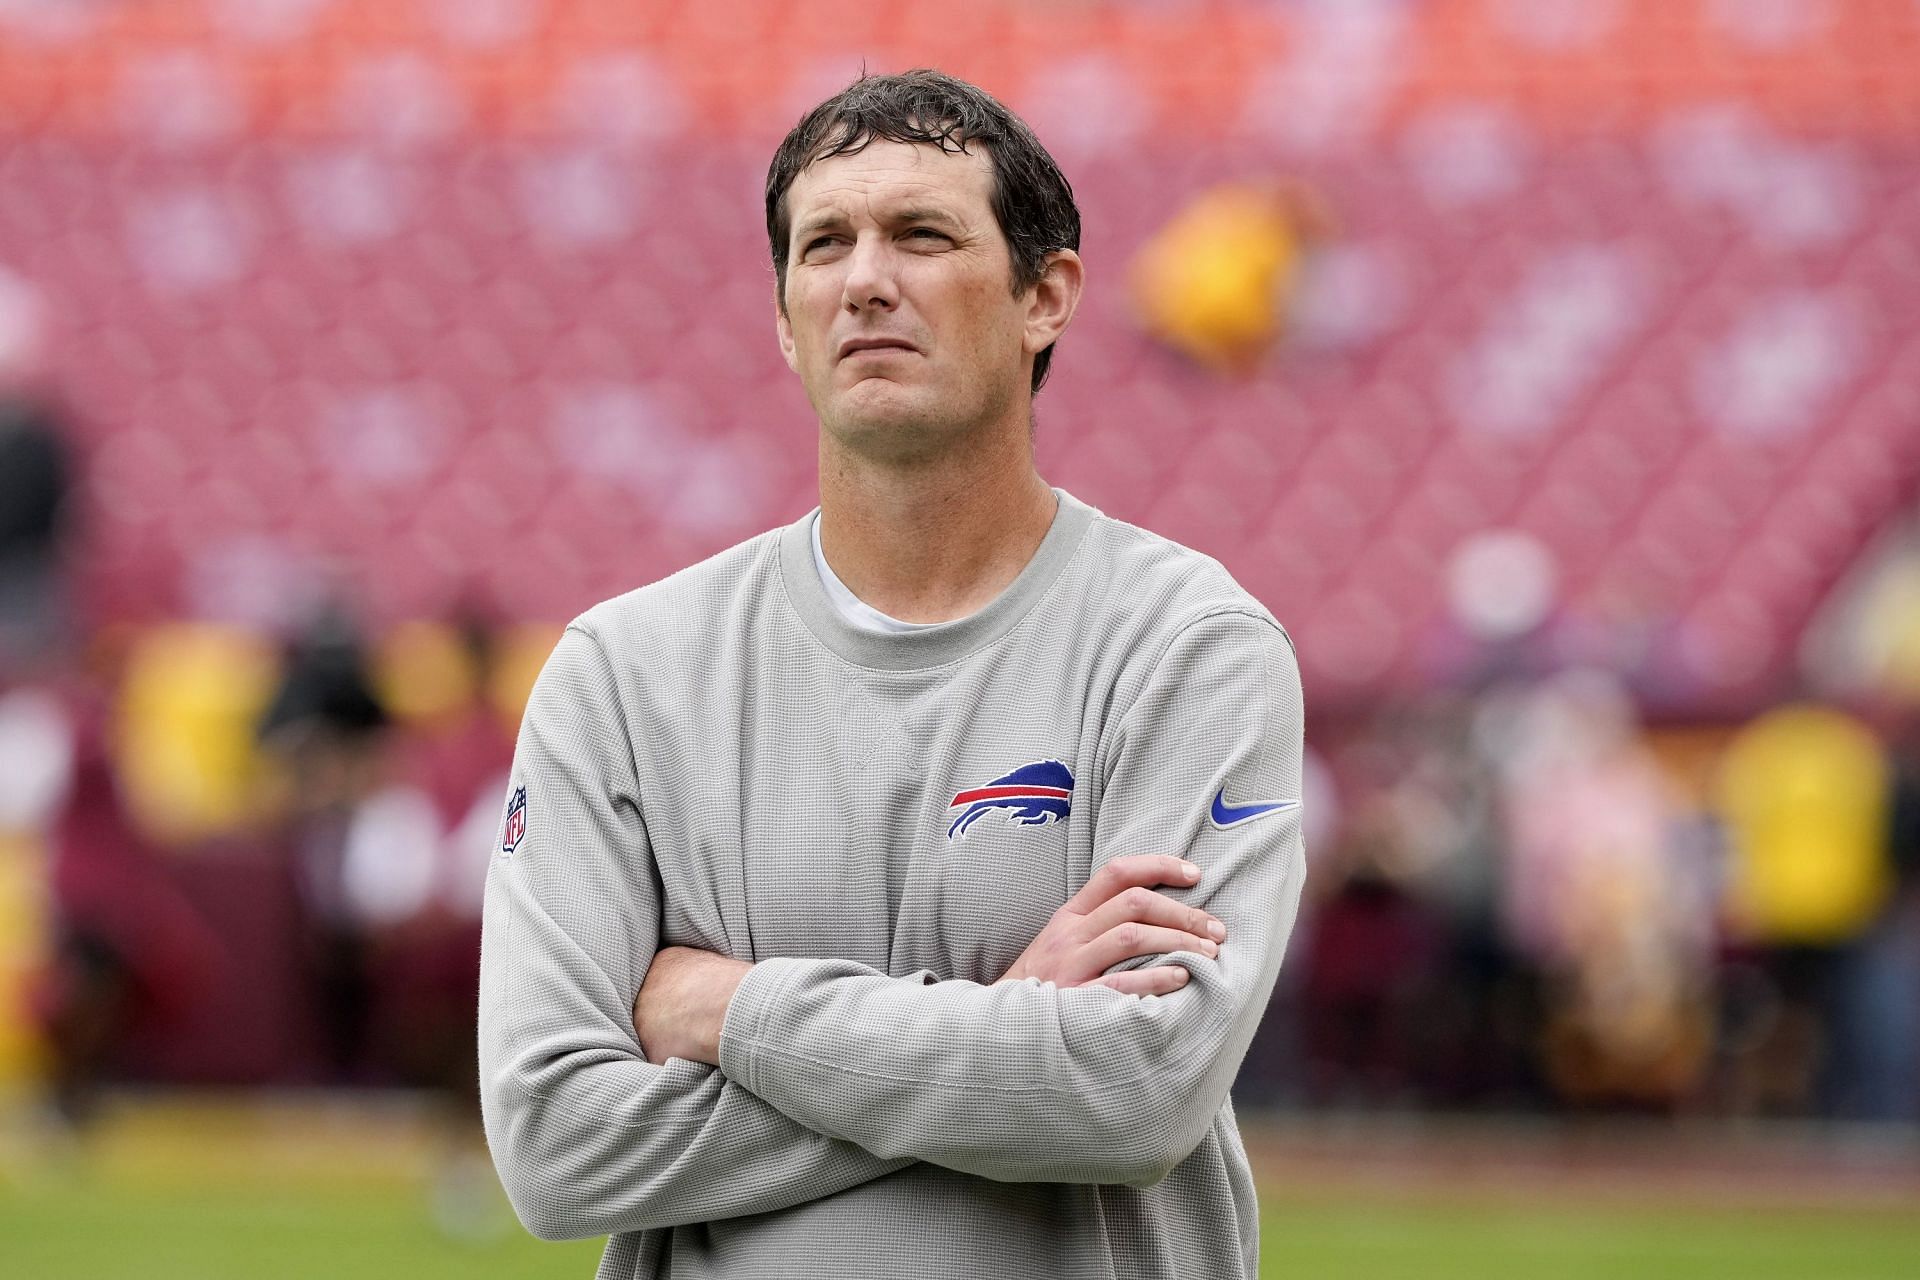 Ken Dorsey could take over for Ron Rivera